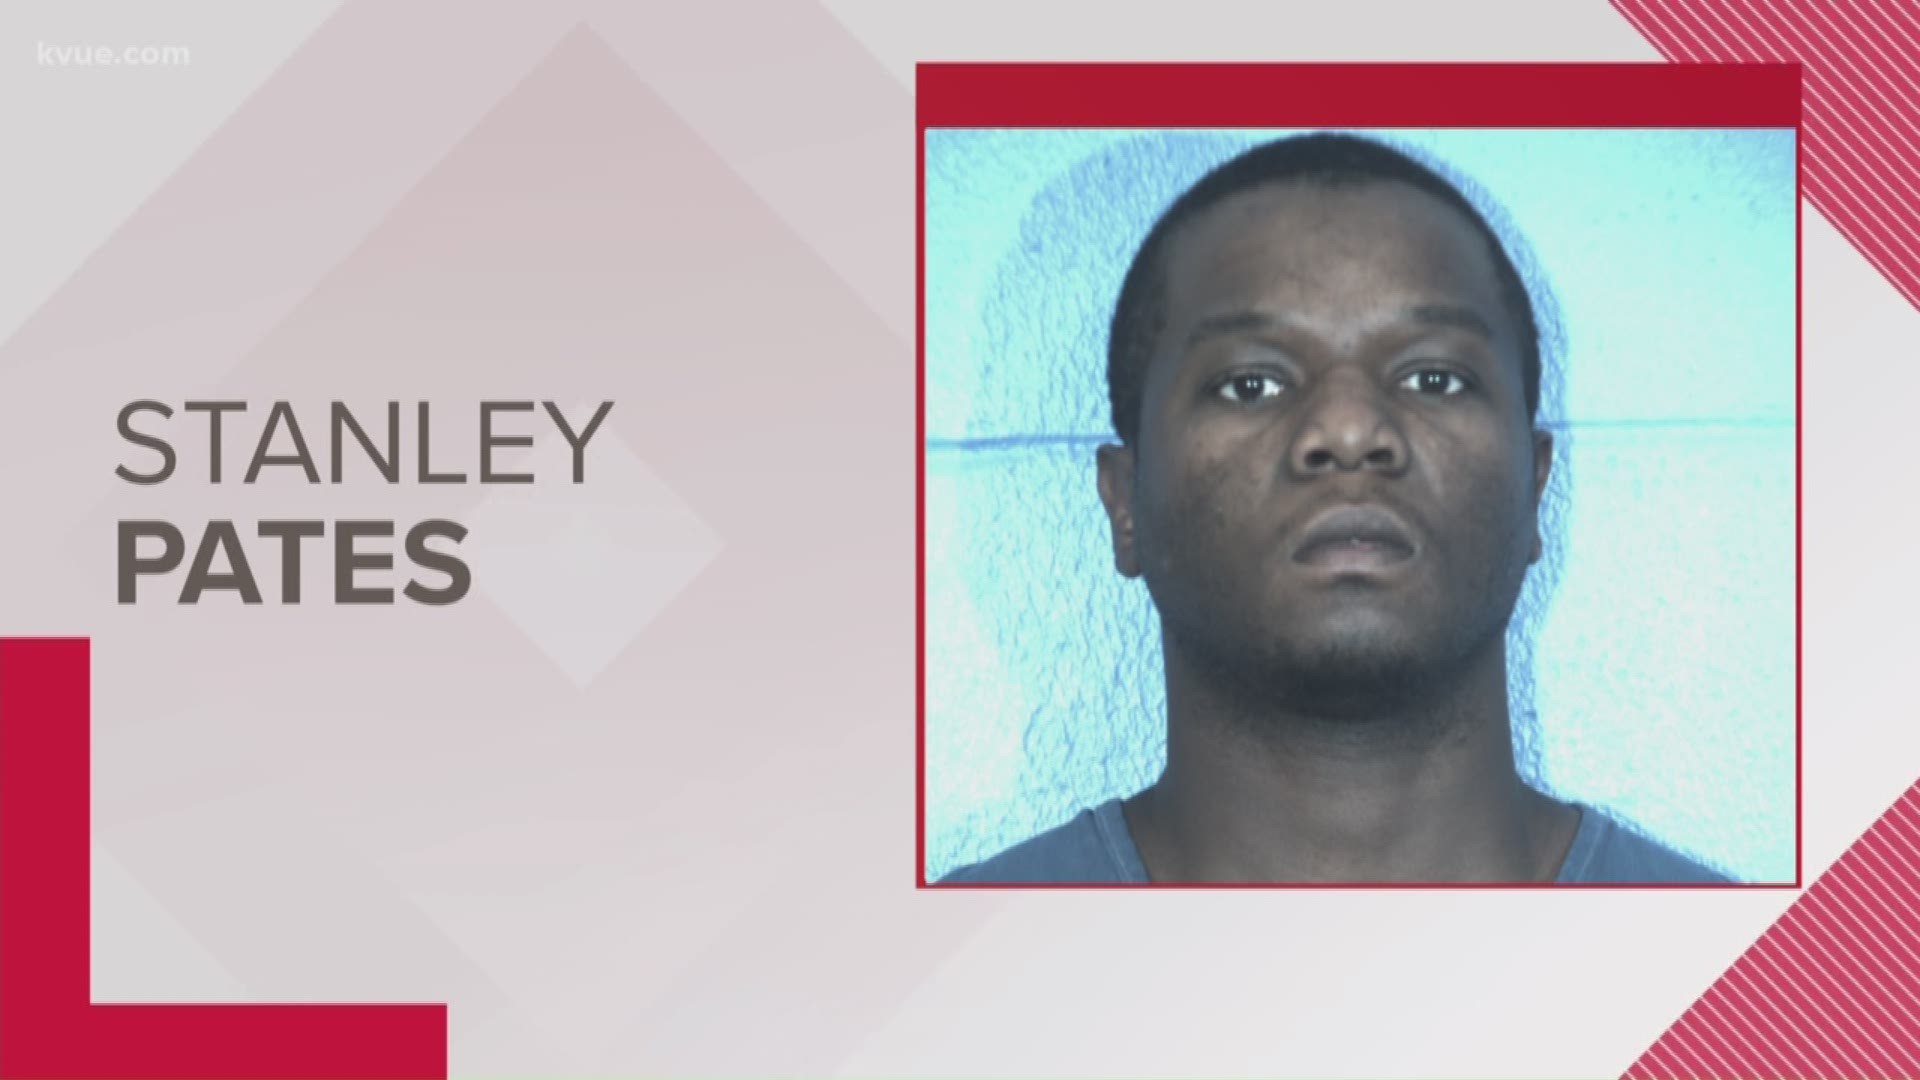 Stanley Earl Pates, 24, was arrested Friday and charged with murder. He was booked into Williamson County Jail. His bail is set at $500,000.